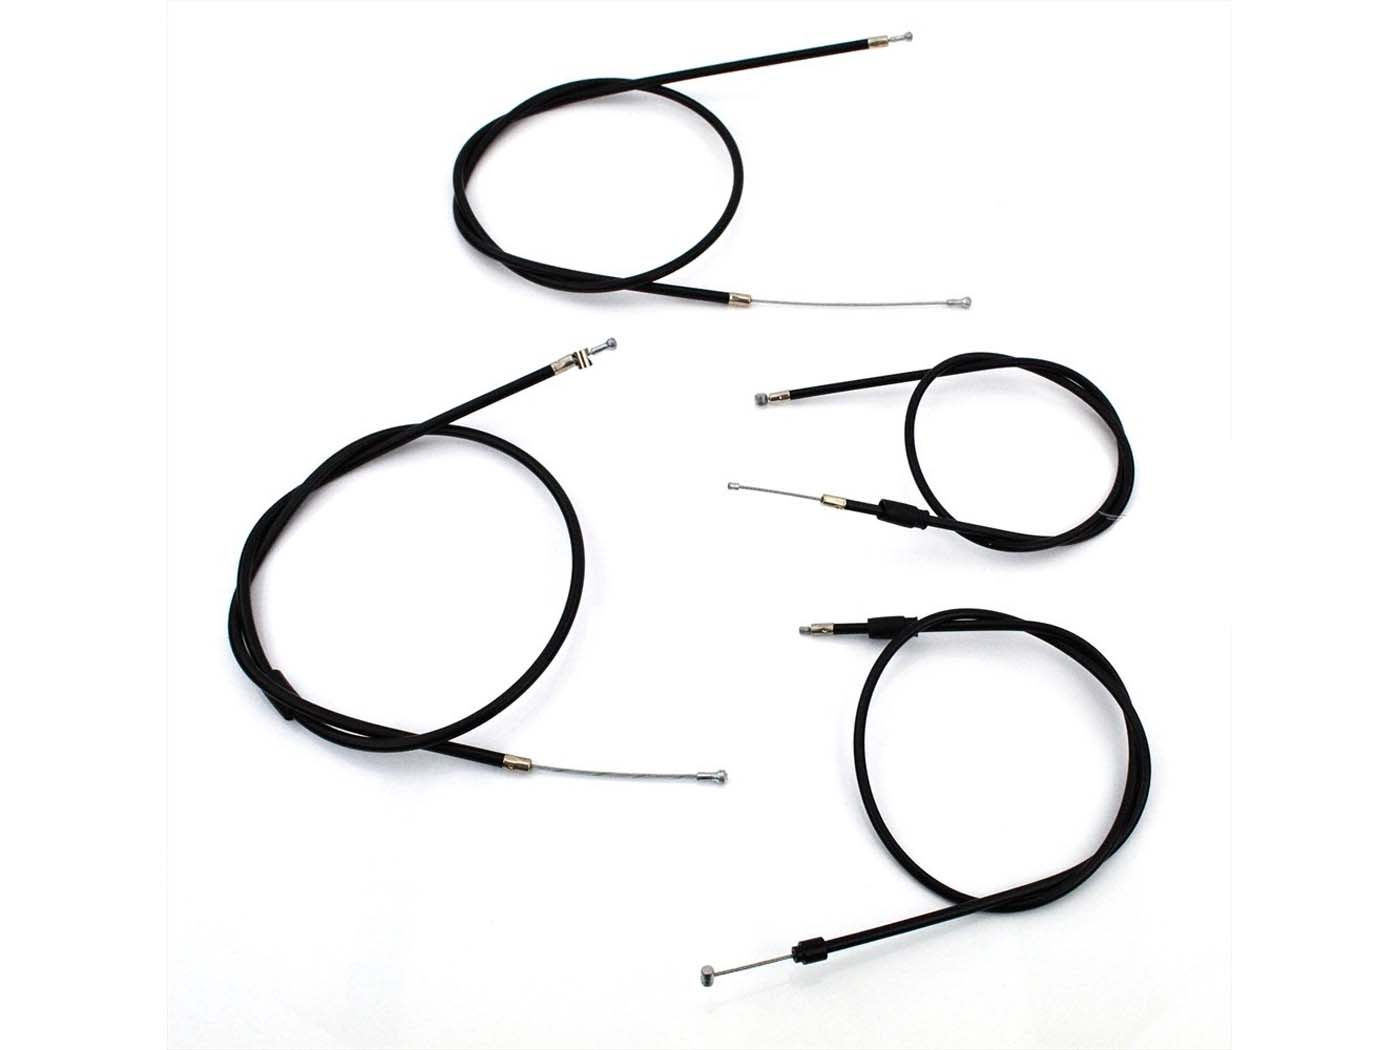 Cable Set 4 Parts For Simson S51, S53, S70